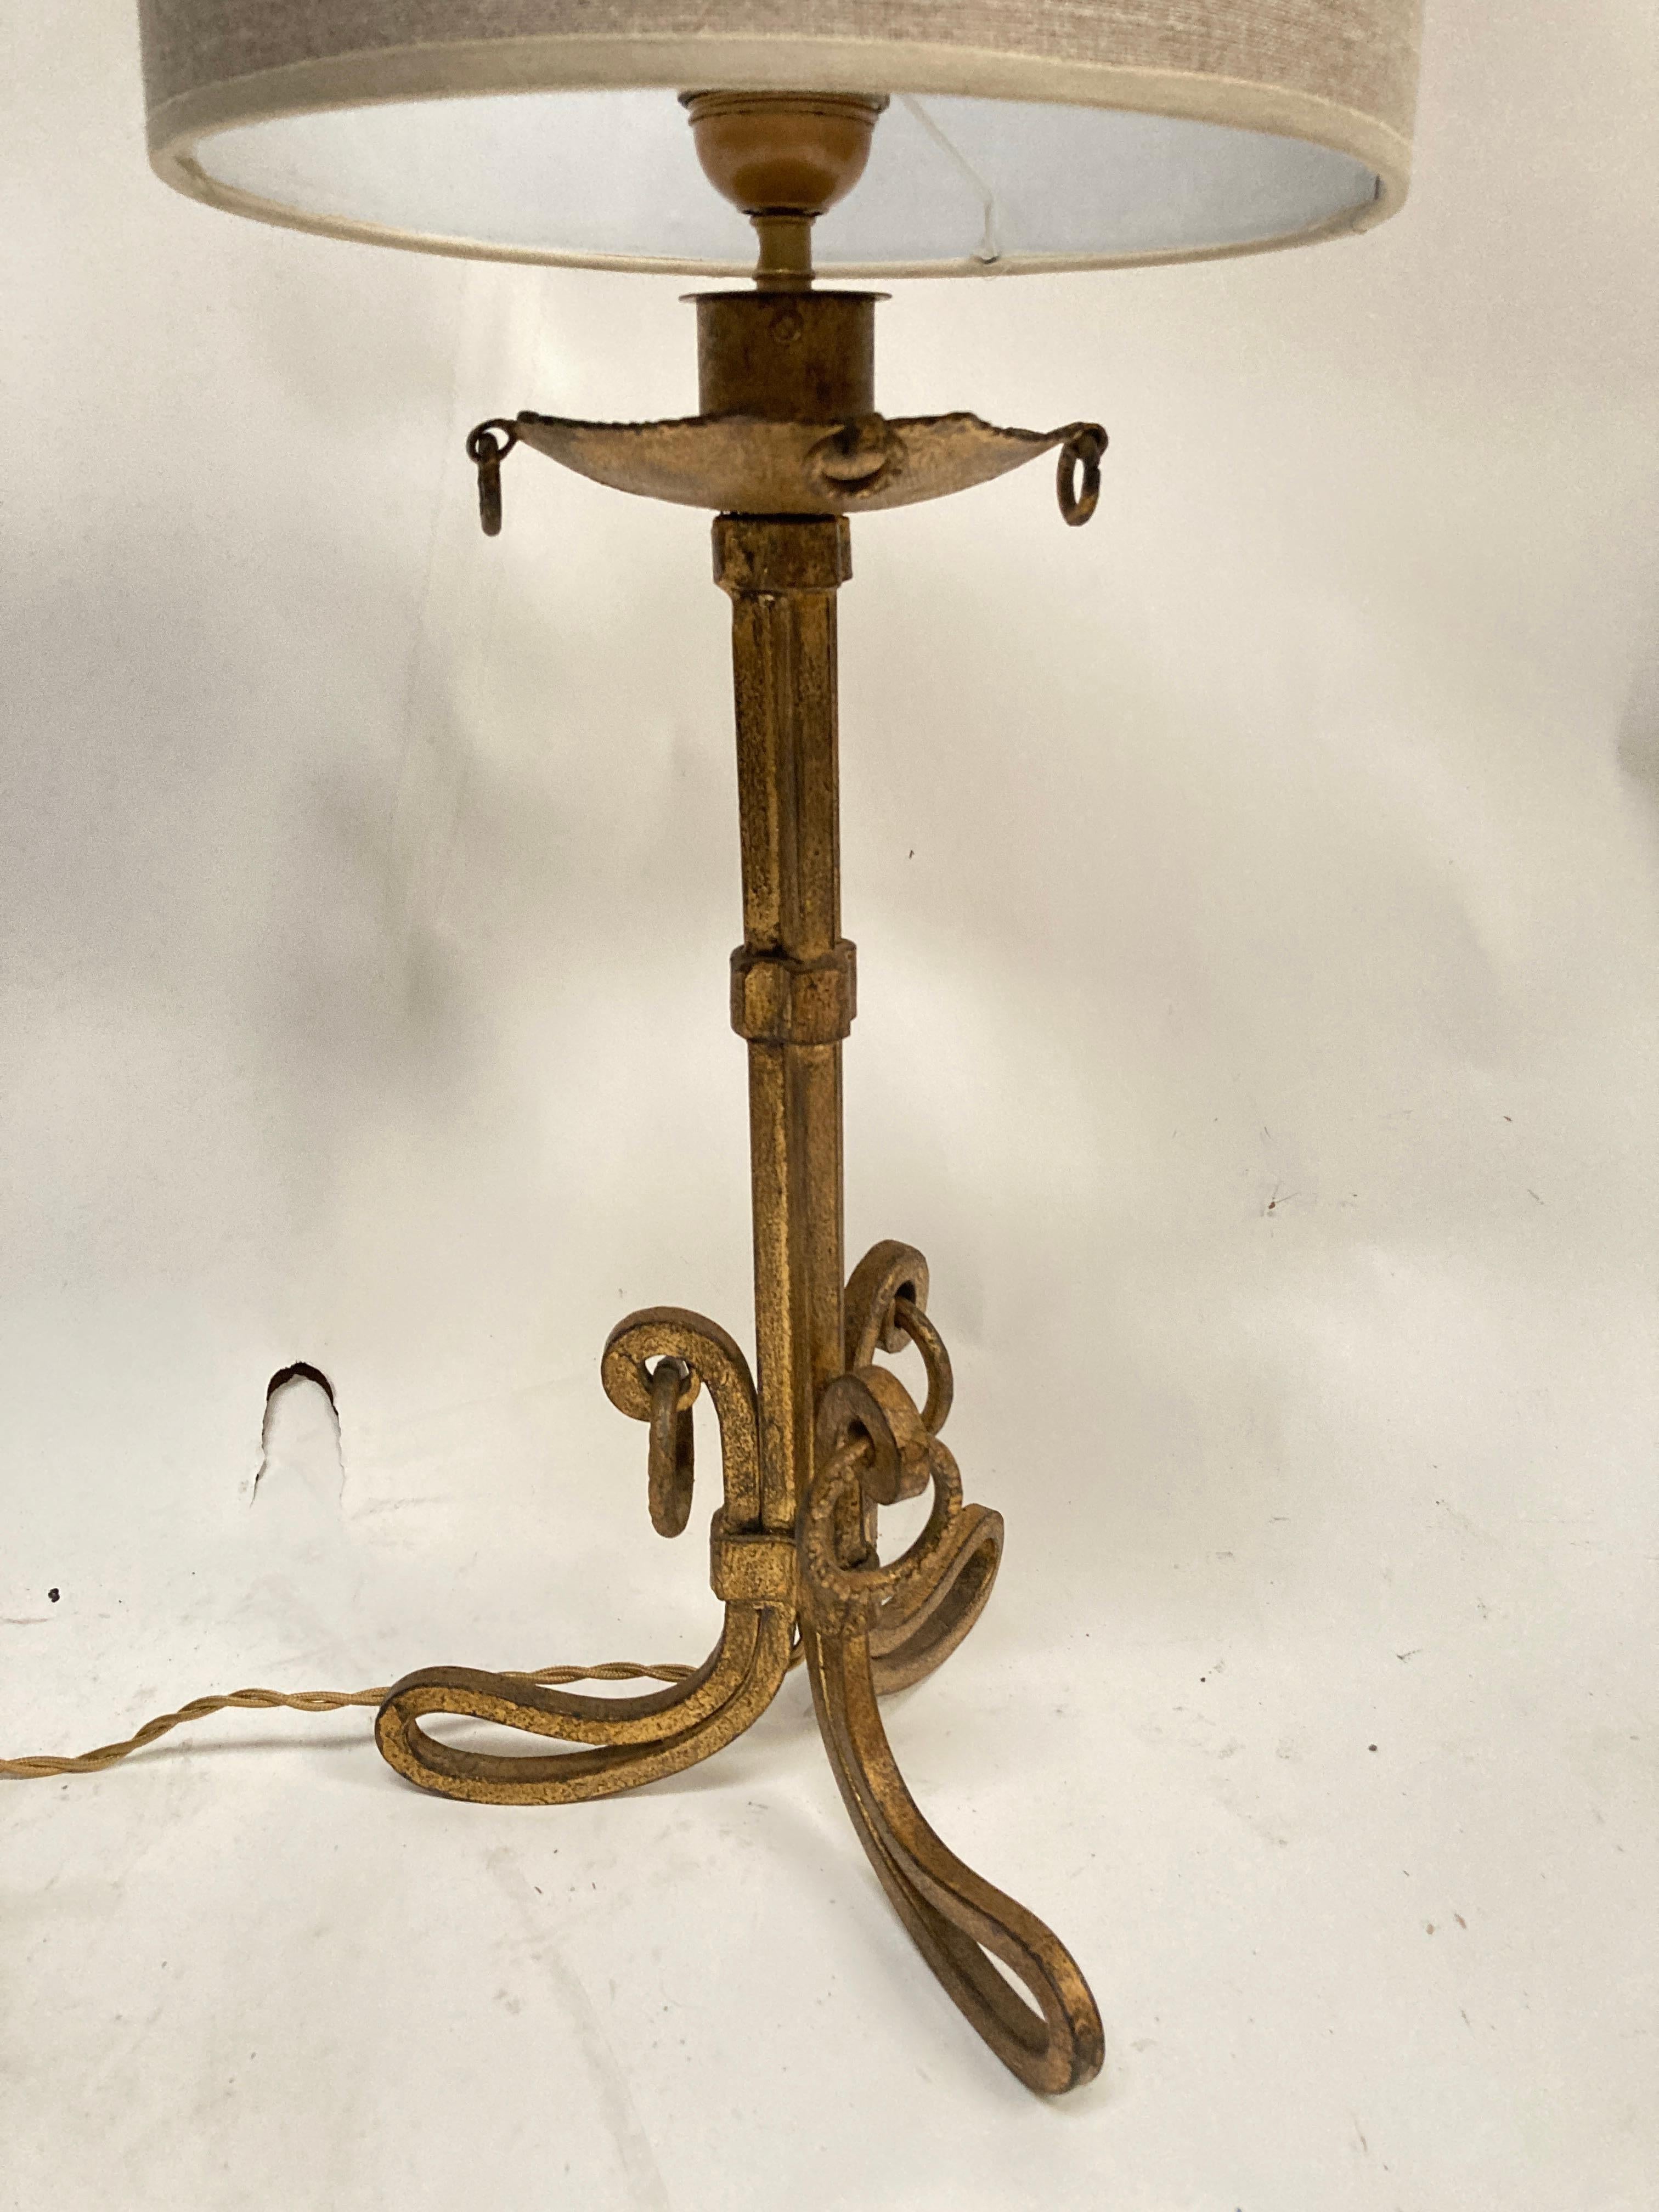 1940's gilt wrought iron table lamp by Maison Ramsay
France
Dimensions given without shade
No shade included